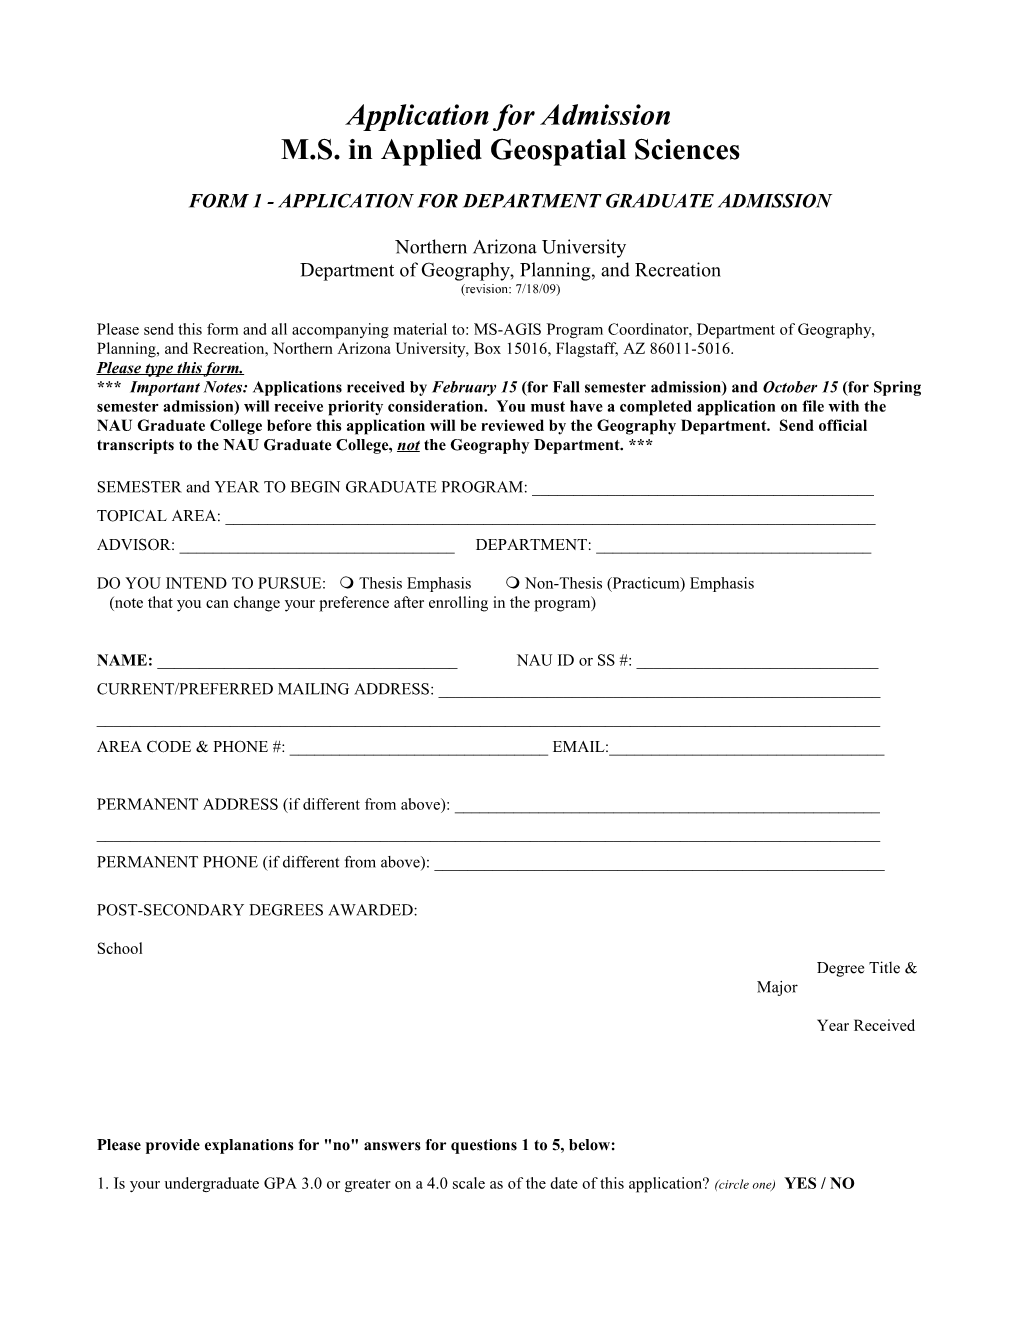 Form 1 - Application for Department Graduate Admission